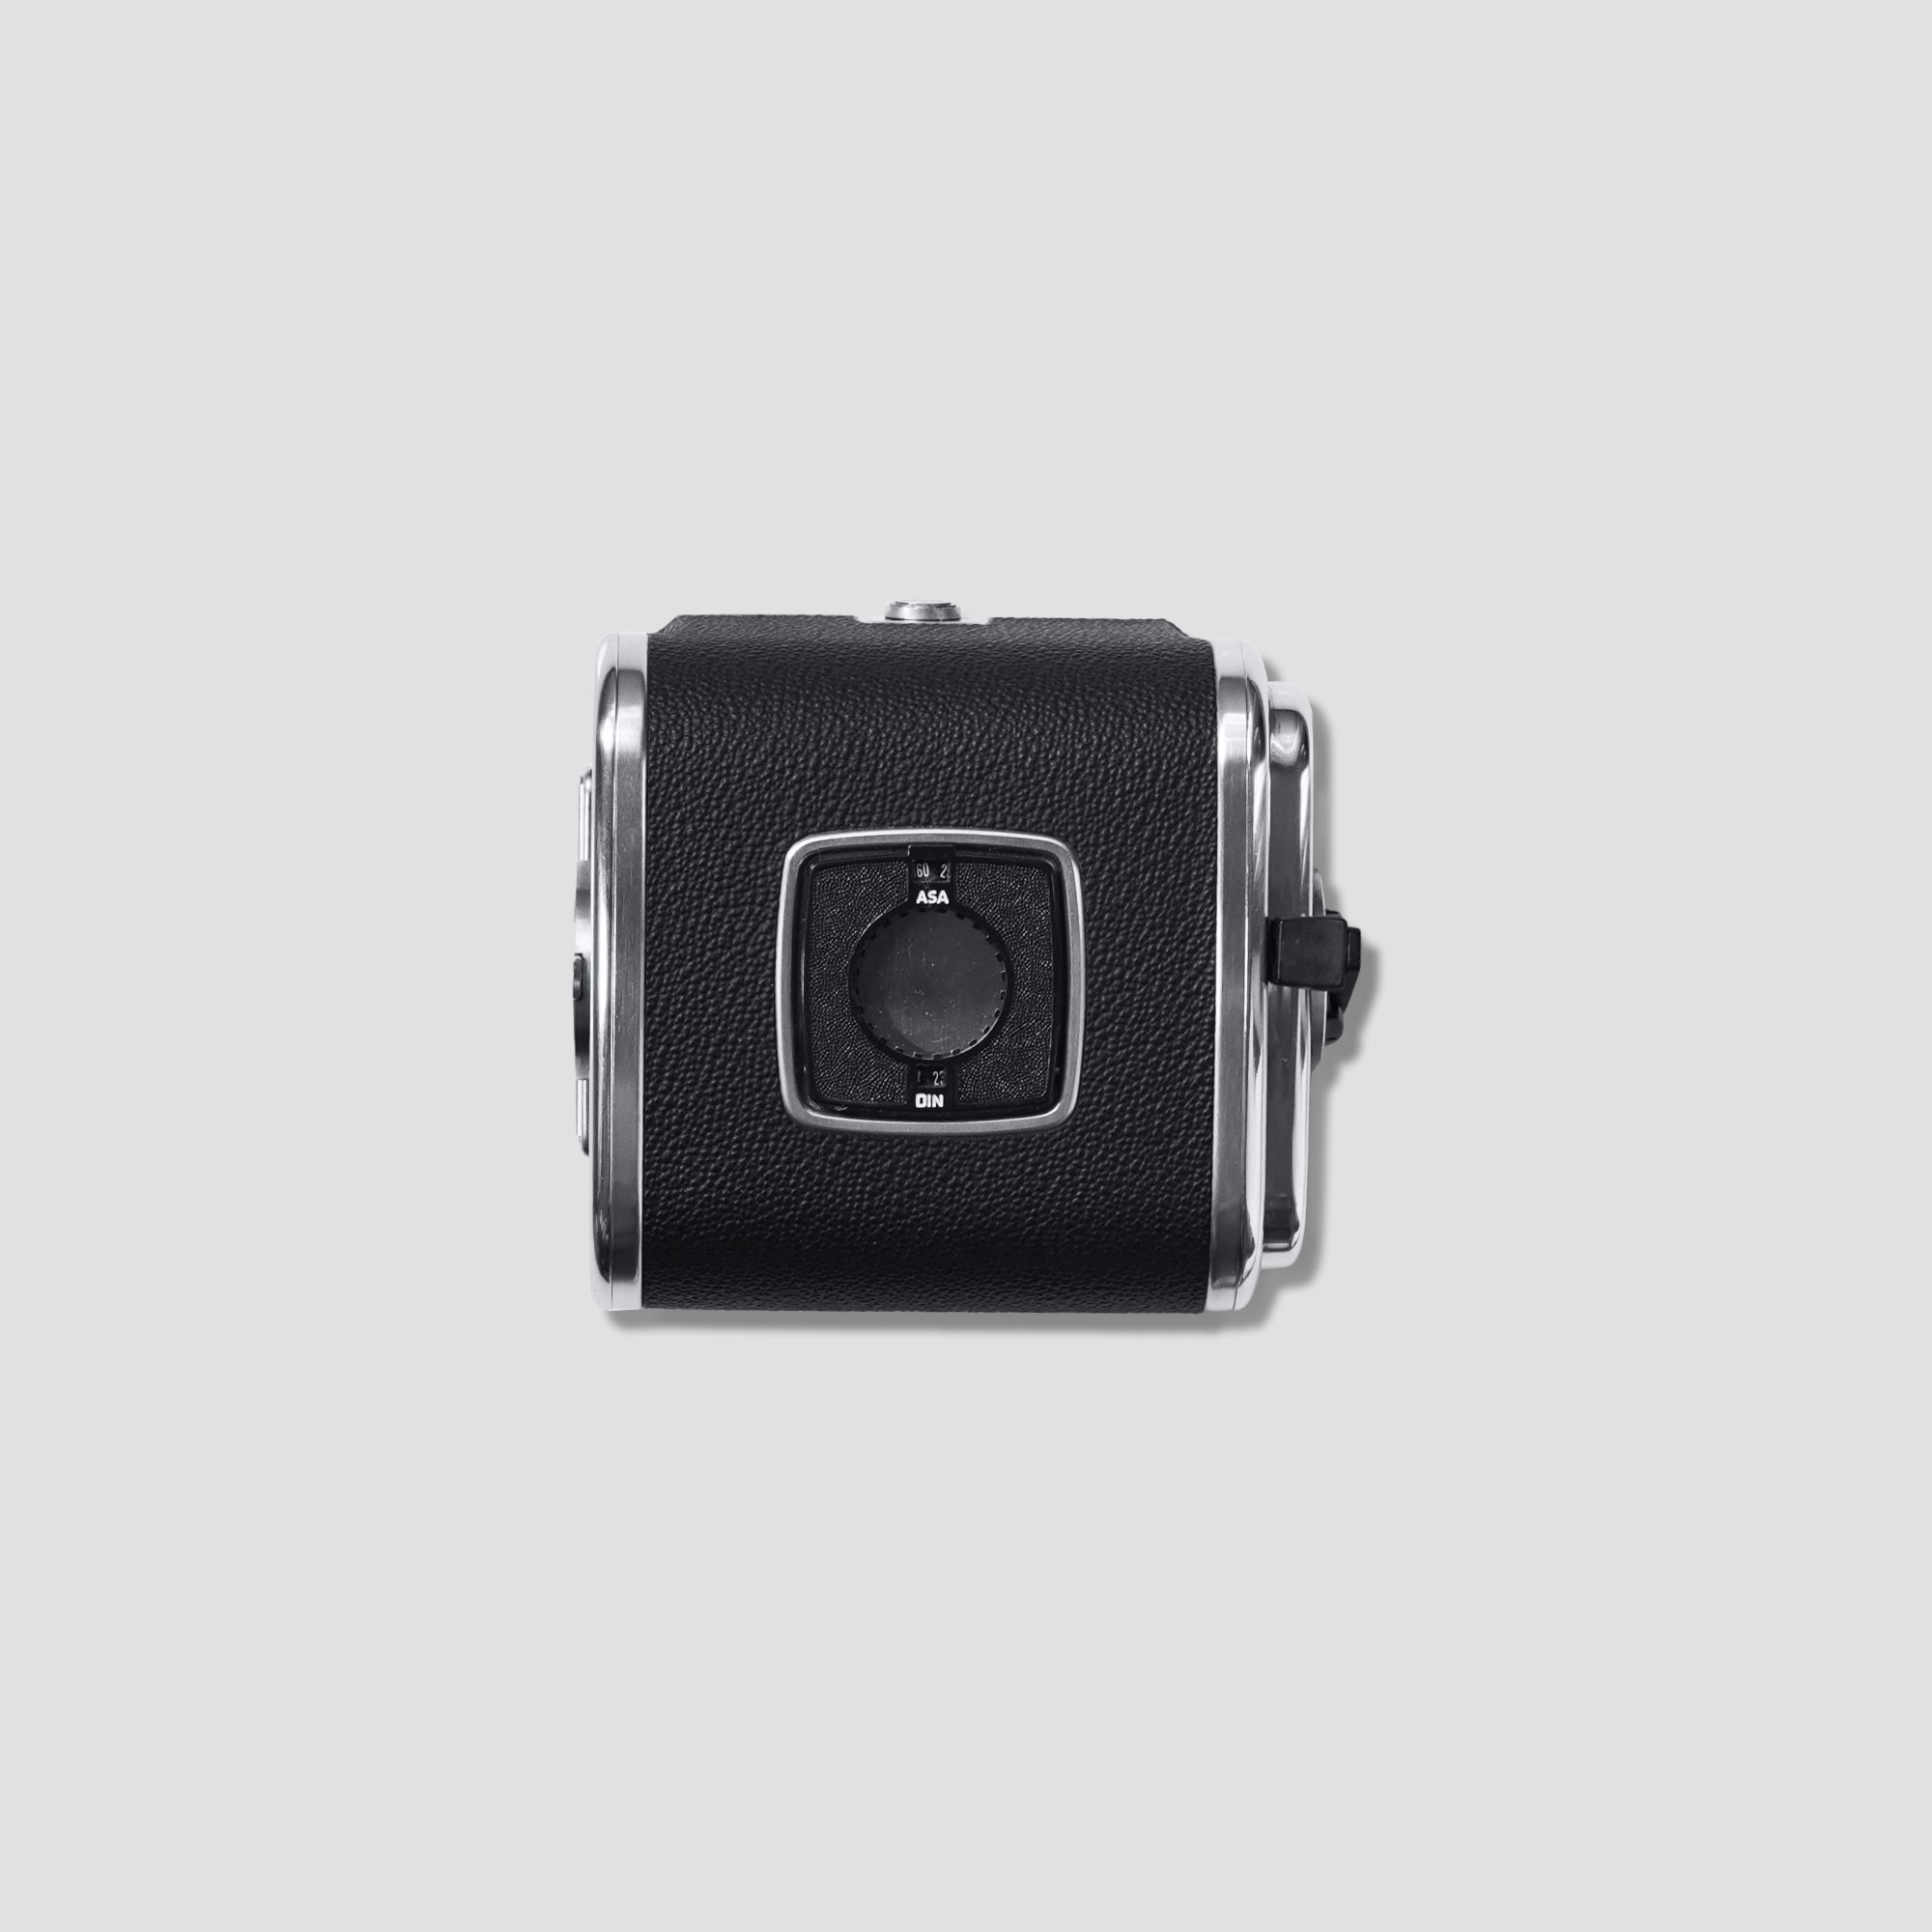 Buy Hasselblad A12 now at Analogue Amsterdam